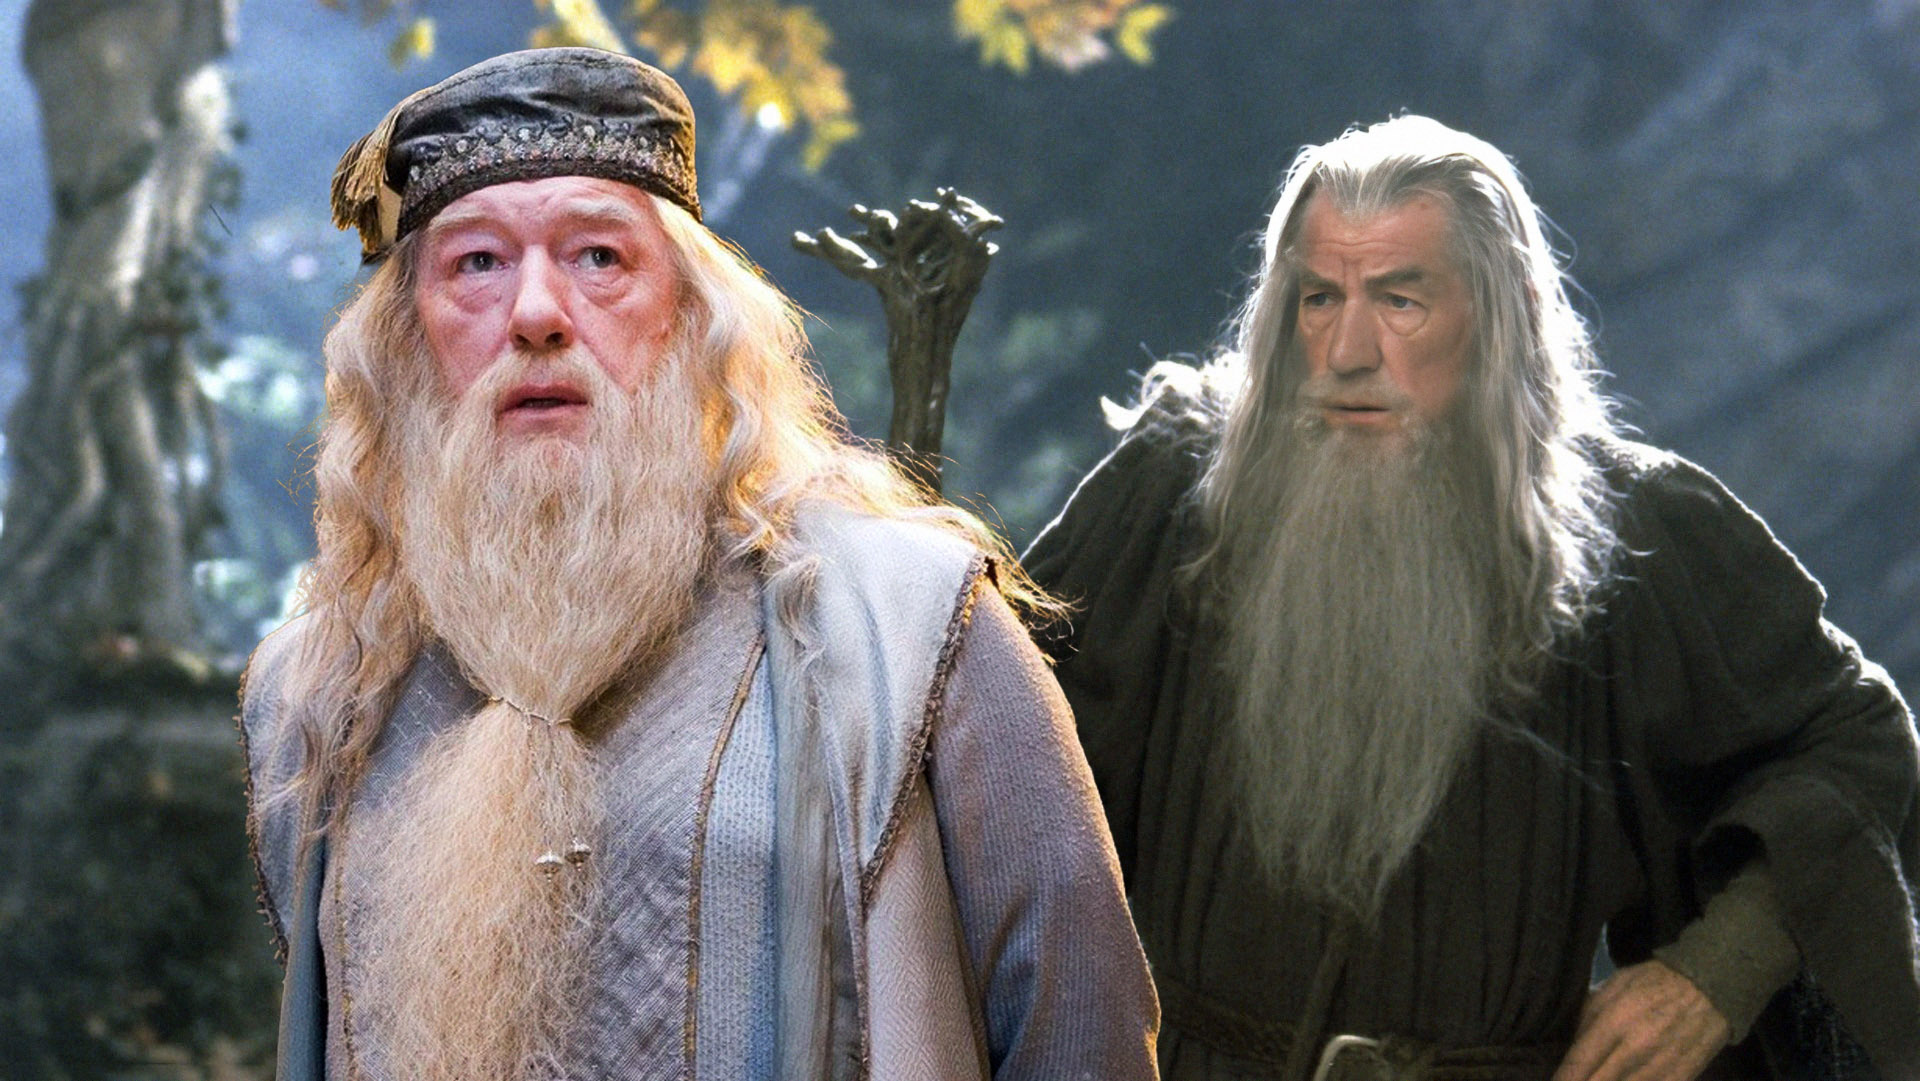 The Hilarious Outcome of Gandalf and Dumbledore Doppelganger Situation